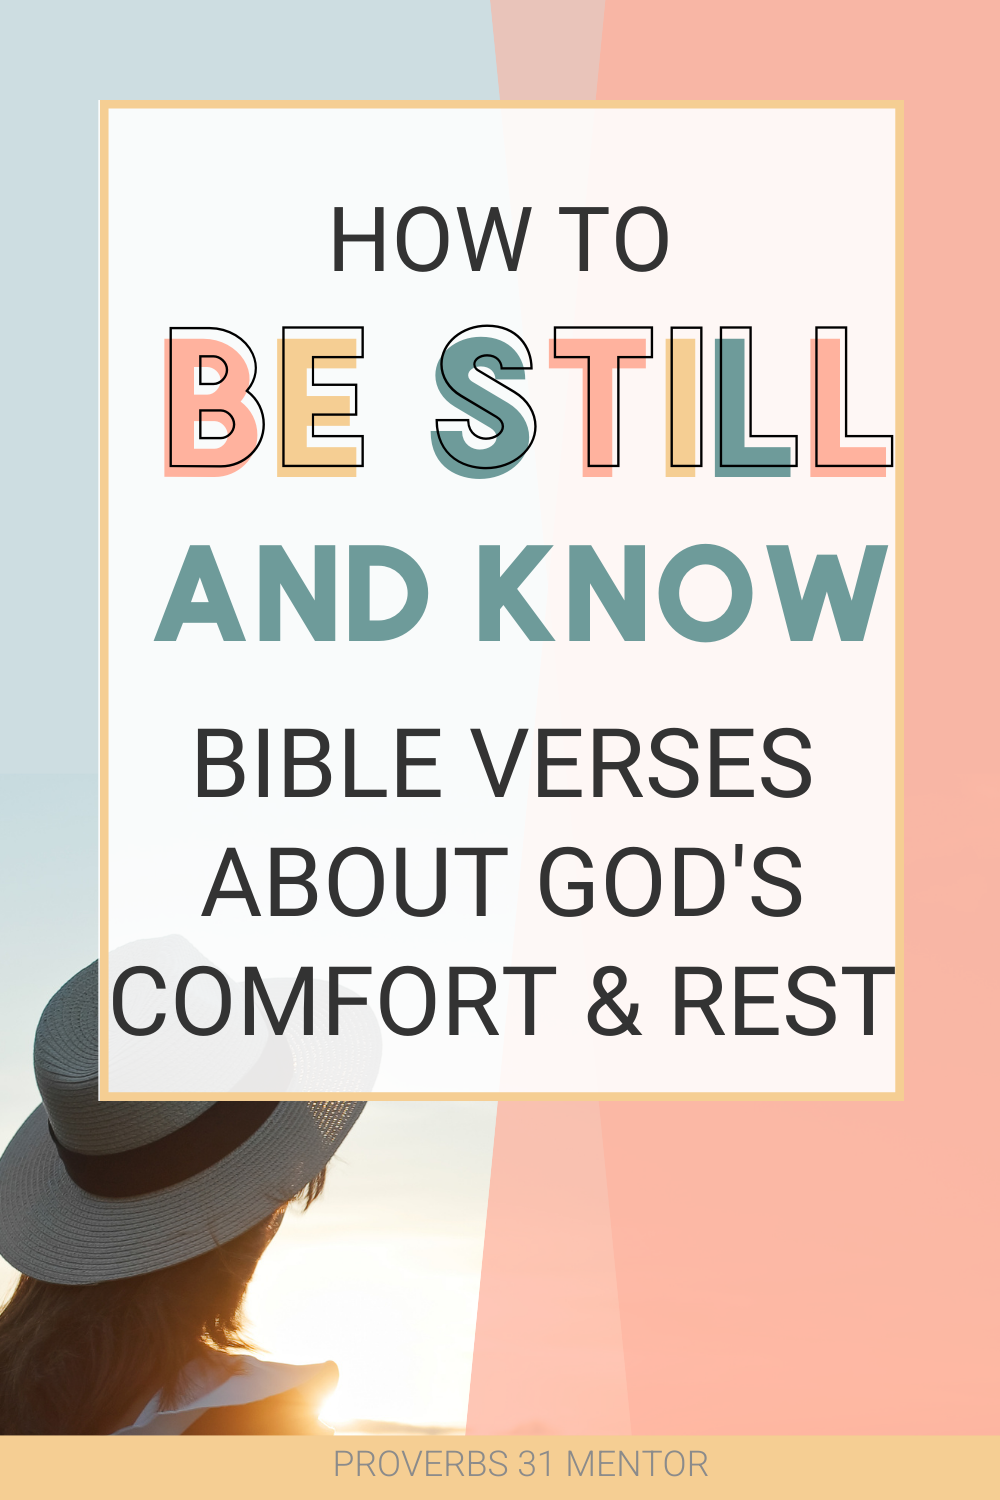 Title- How to Be Still and know Bible verses About God's Comfort and Rest Picture- woman in a hat looking towards heaven